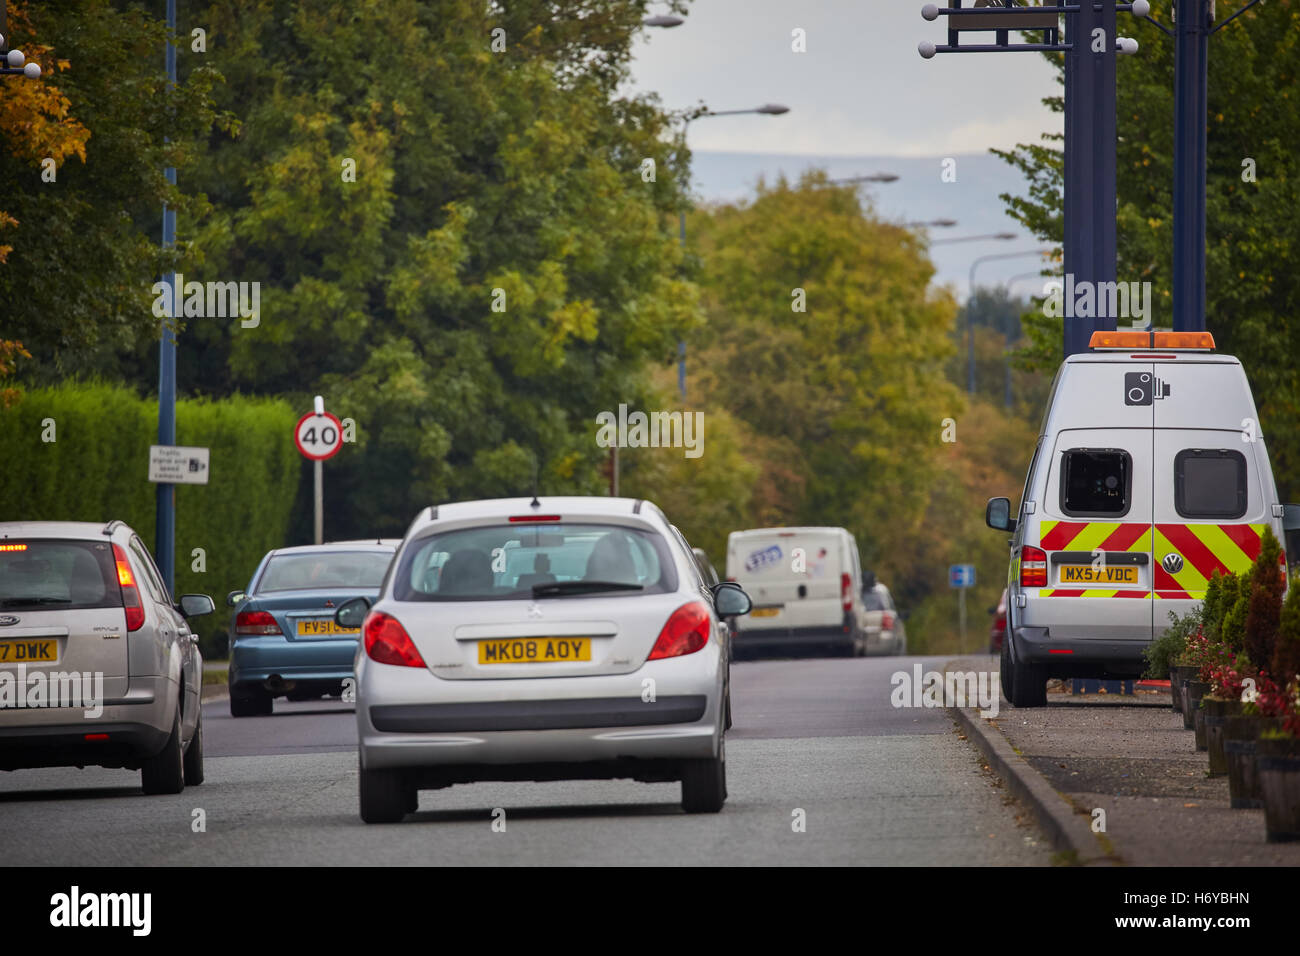 mobile enforcement vehicle speed trap A57 Hyde road  speed enforcement Greater Manchester Casualty Reduction Partnership van rad Stock Photo